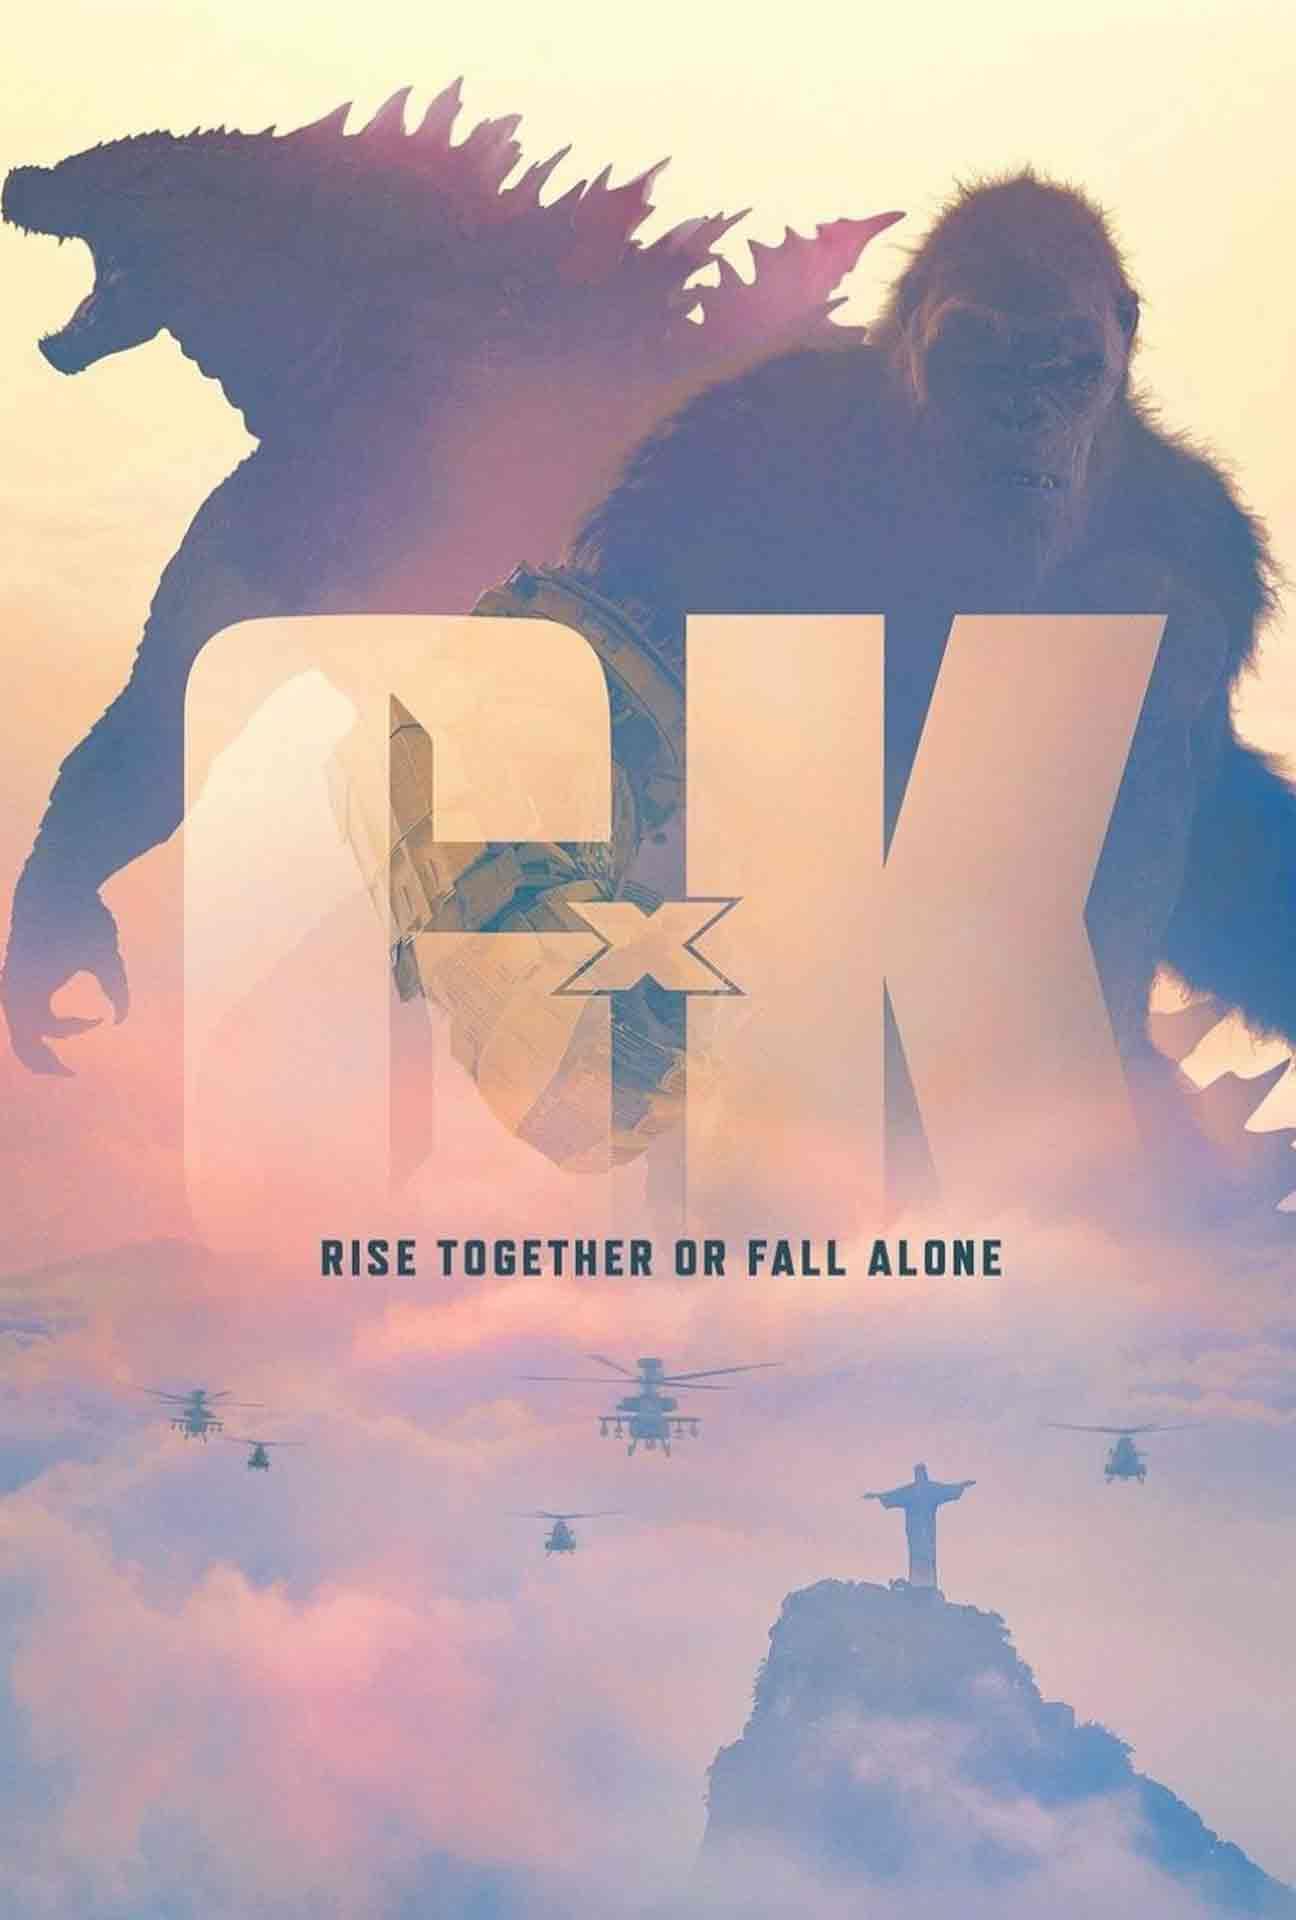 Movie Poster for Godzilla x Kong: The New Empire